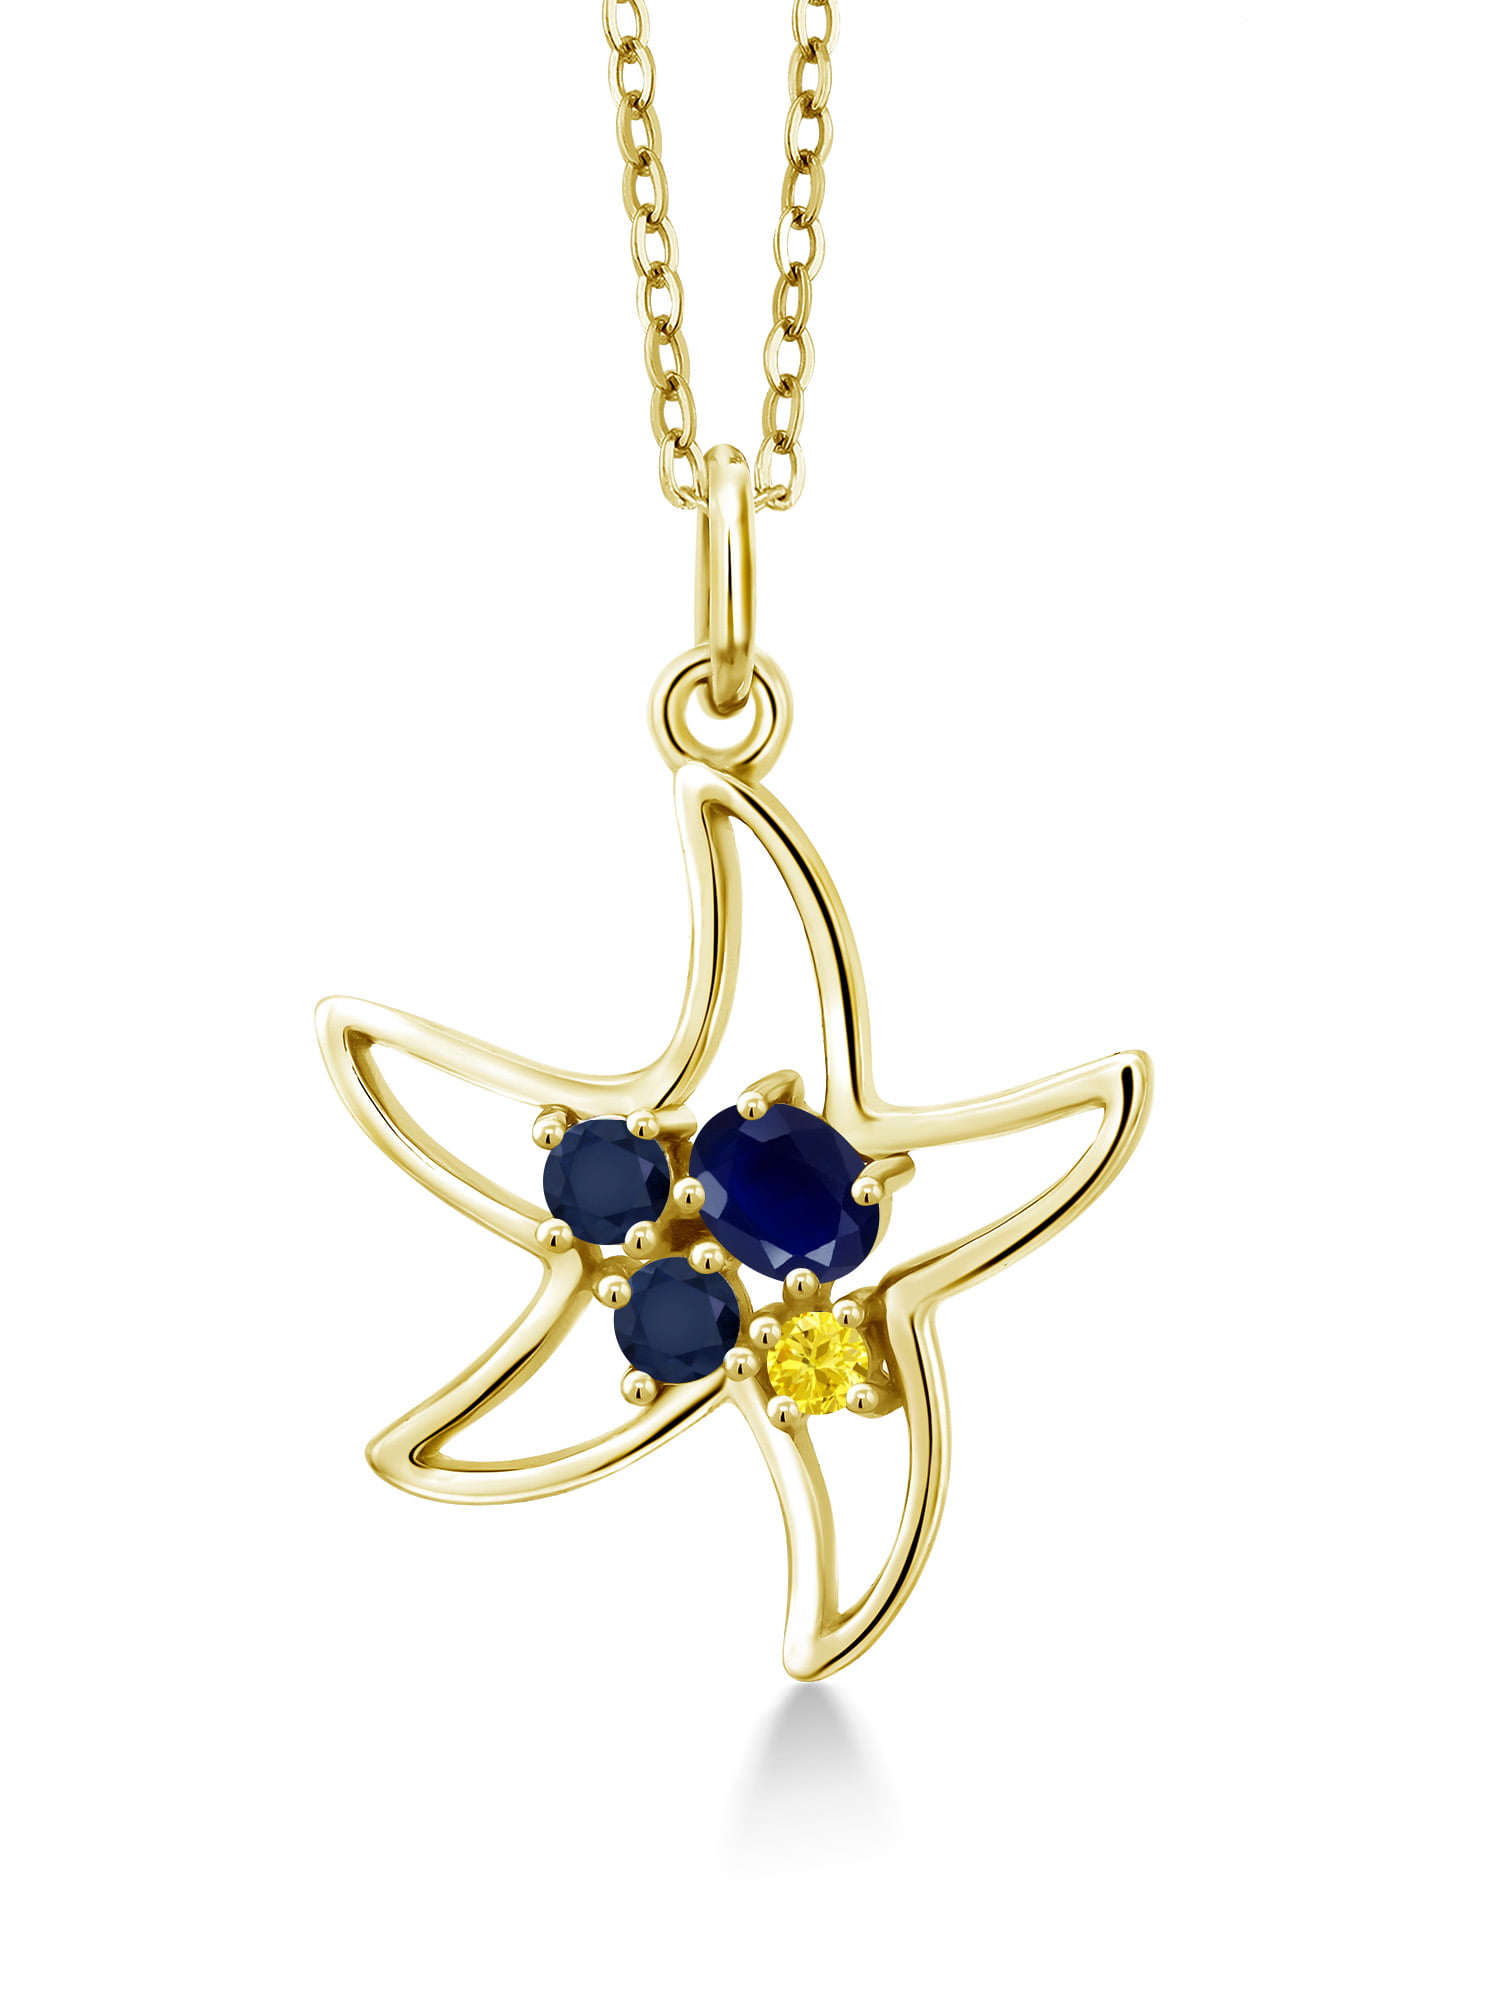 Gem Stone King 0.37 Ct Oval Blue Sapphire Yellow Sapphire 925 Sterling Silver Starfish Necklace 